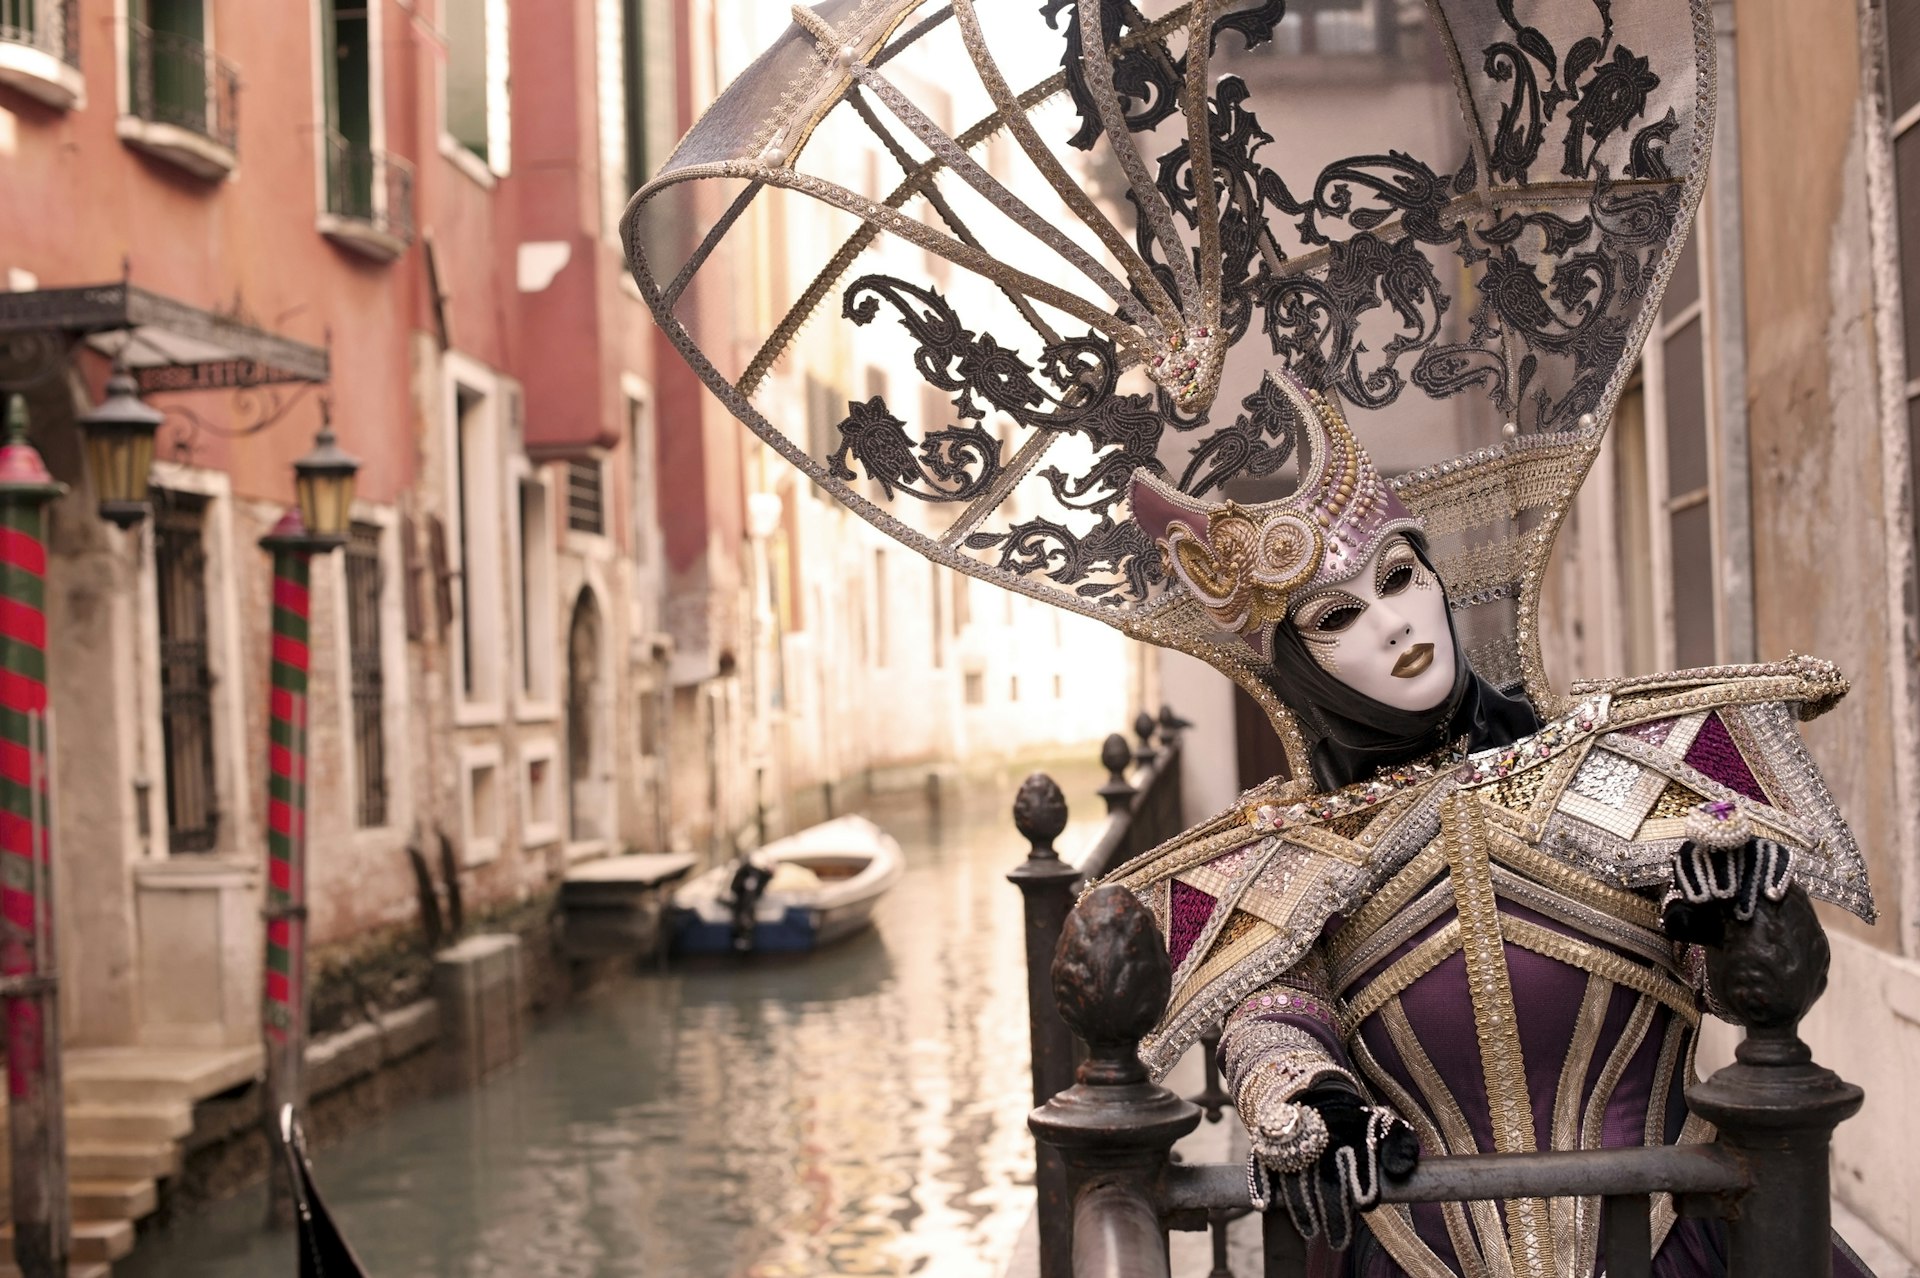 A masked person during the Venice Carnival. They are posing in front of house along one of the canals in Venice, Italy.